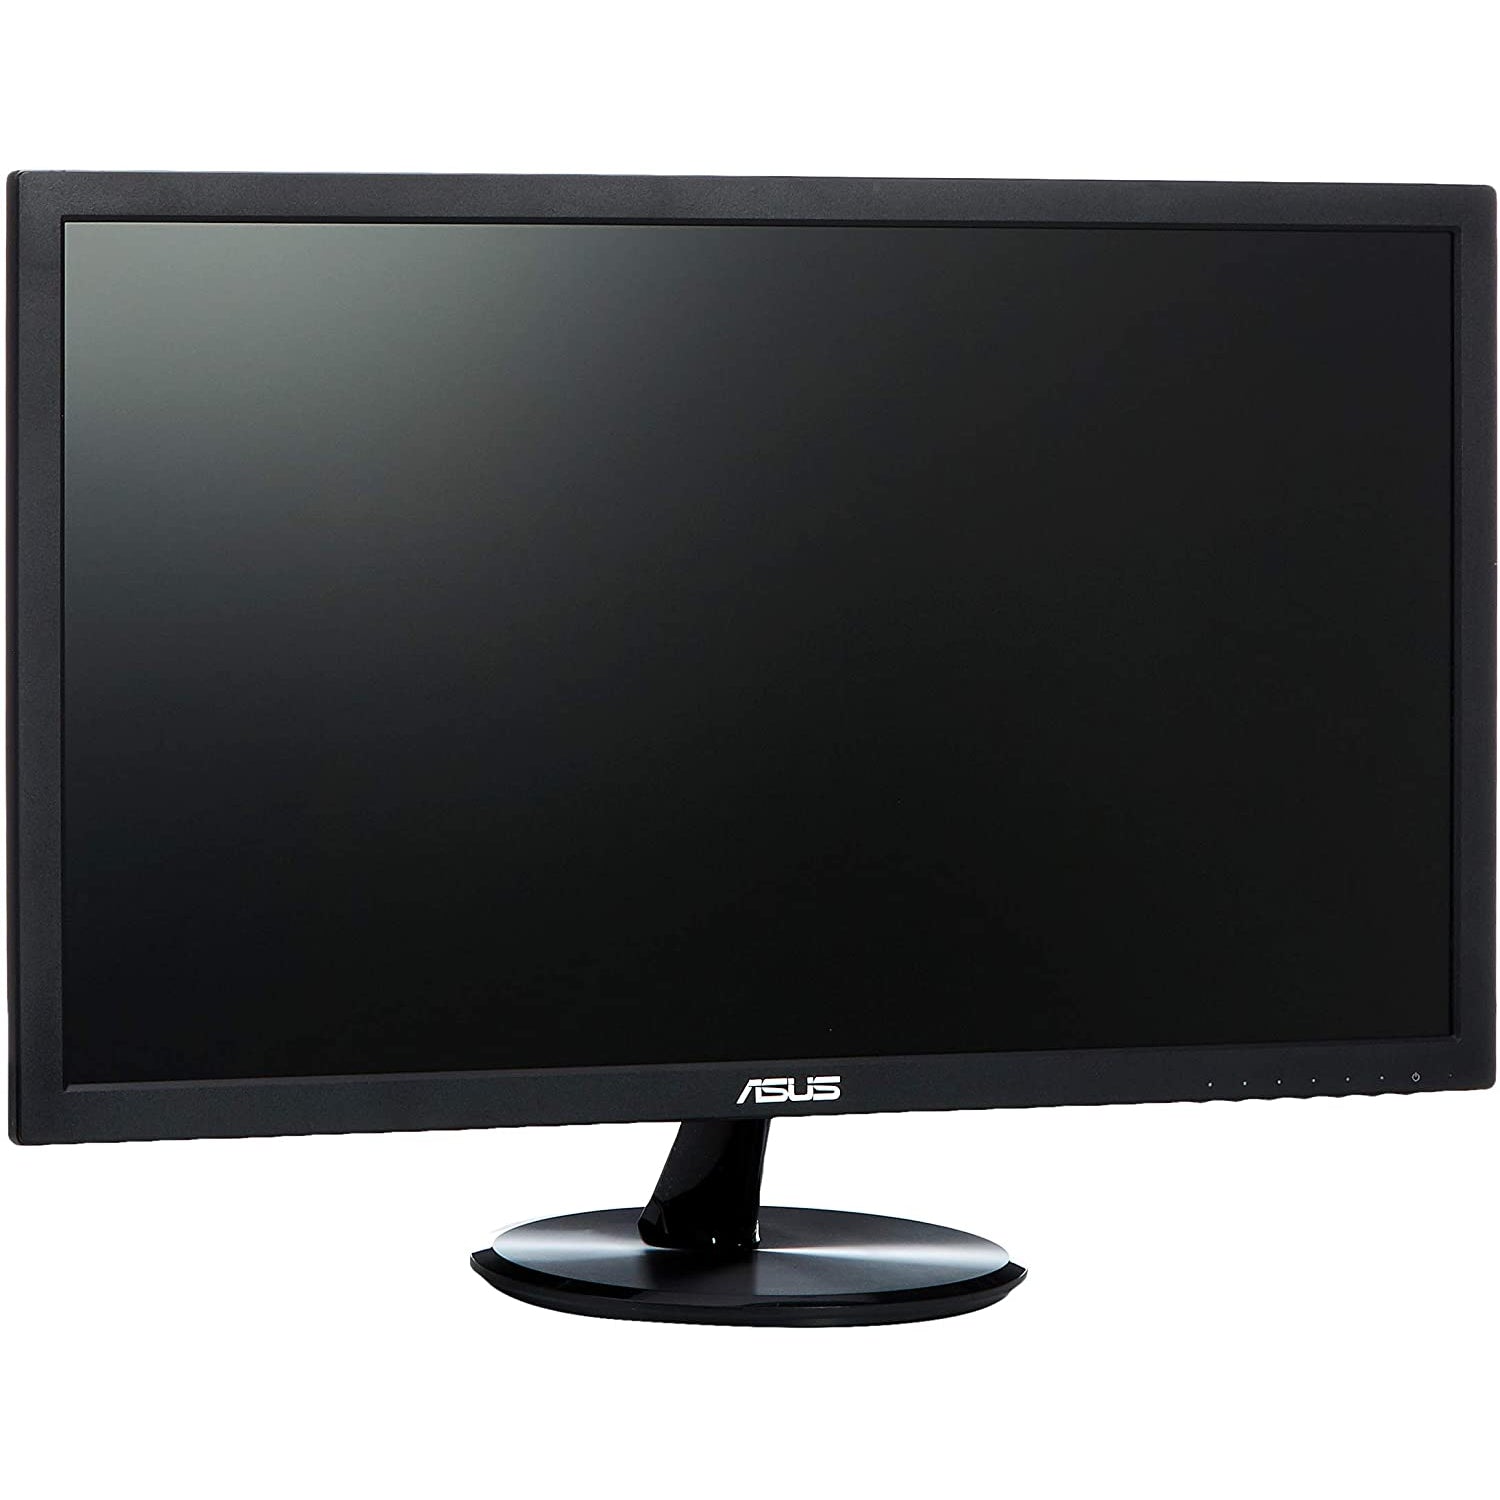 ASUS VP248H, 24 Inch FHD (1920 x 1080) Gaming Monitor, 1 ms, Up to 75 Hz